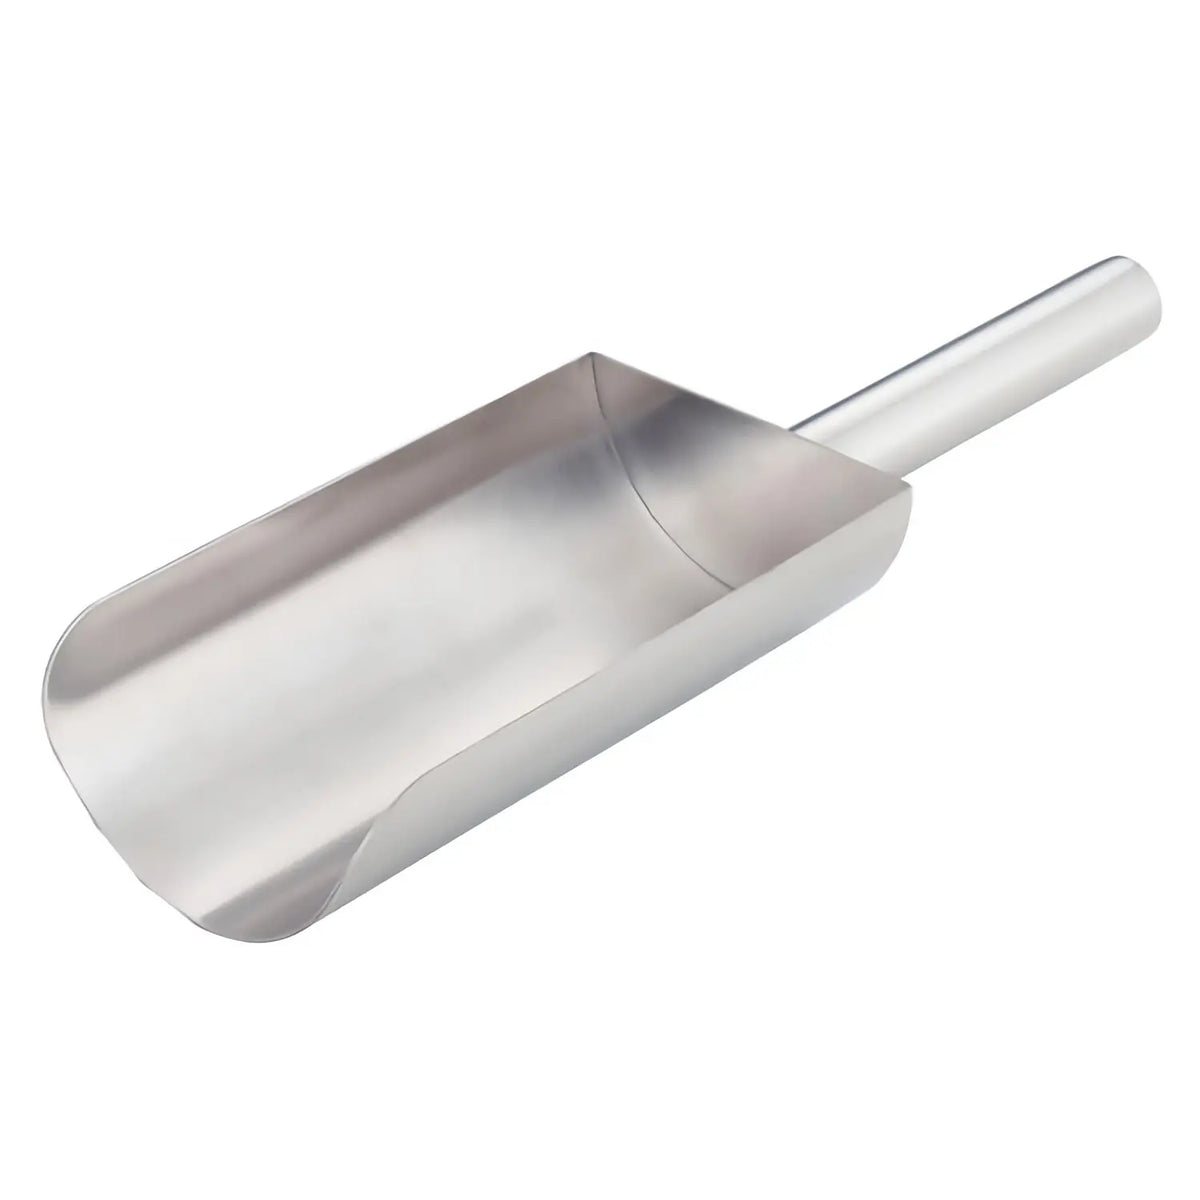 Sampo Sangyo Stainless Steel Ice Scoop